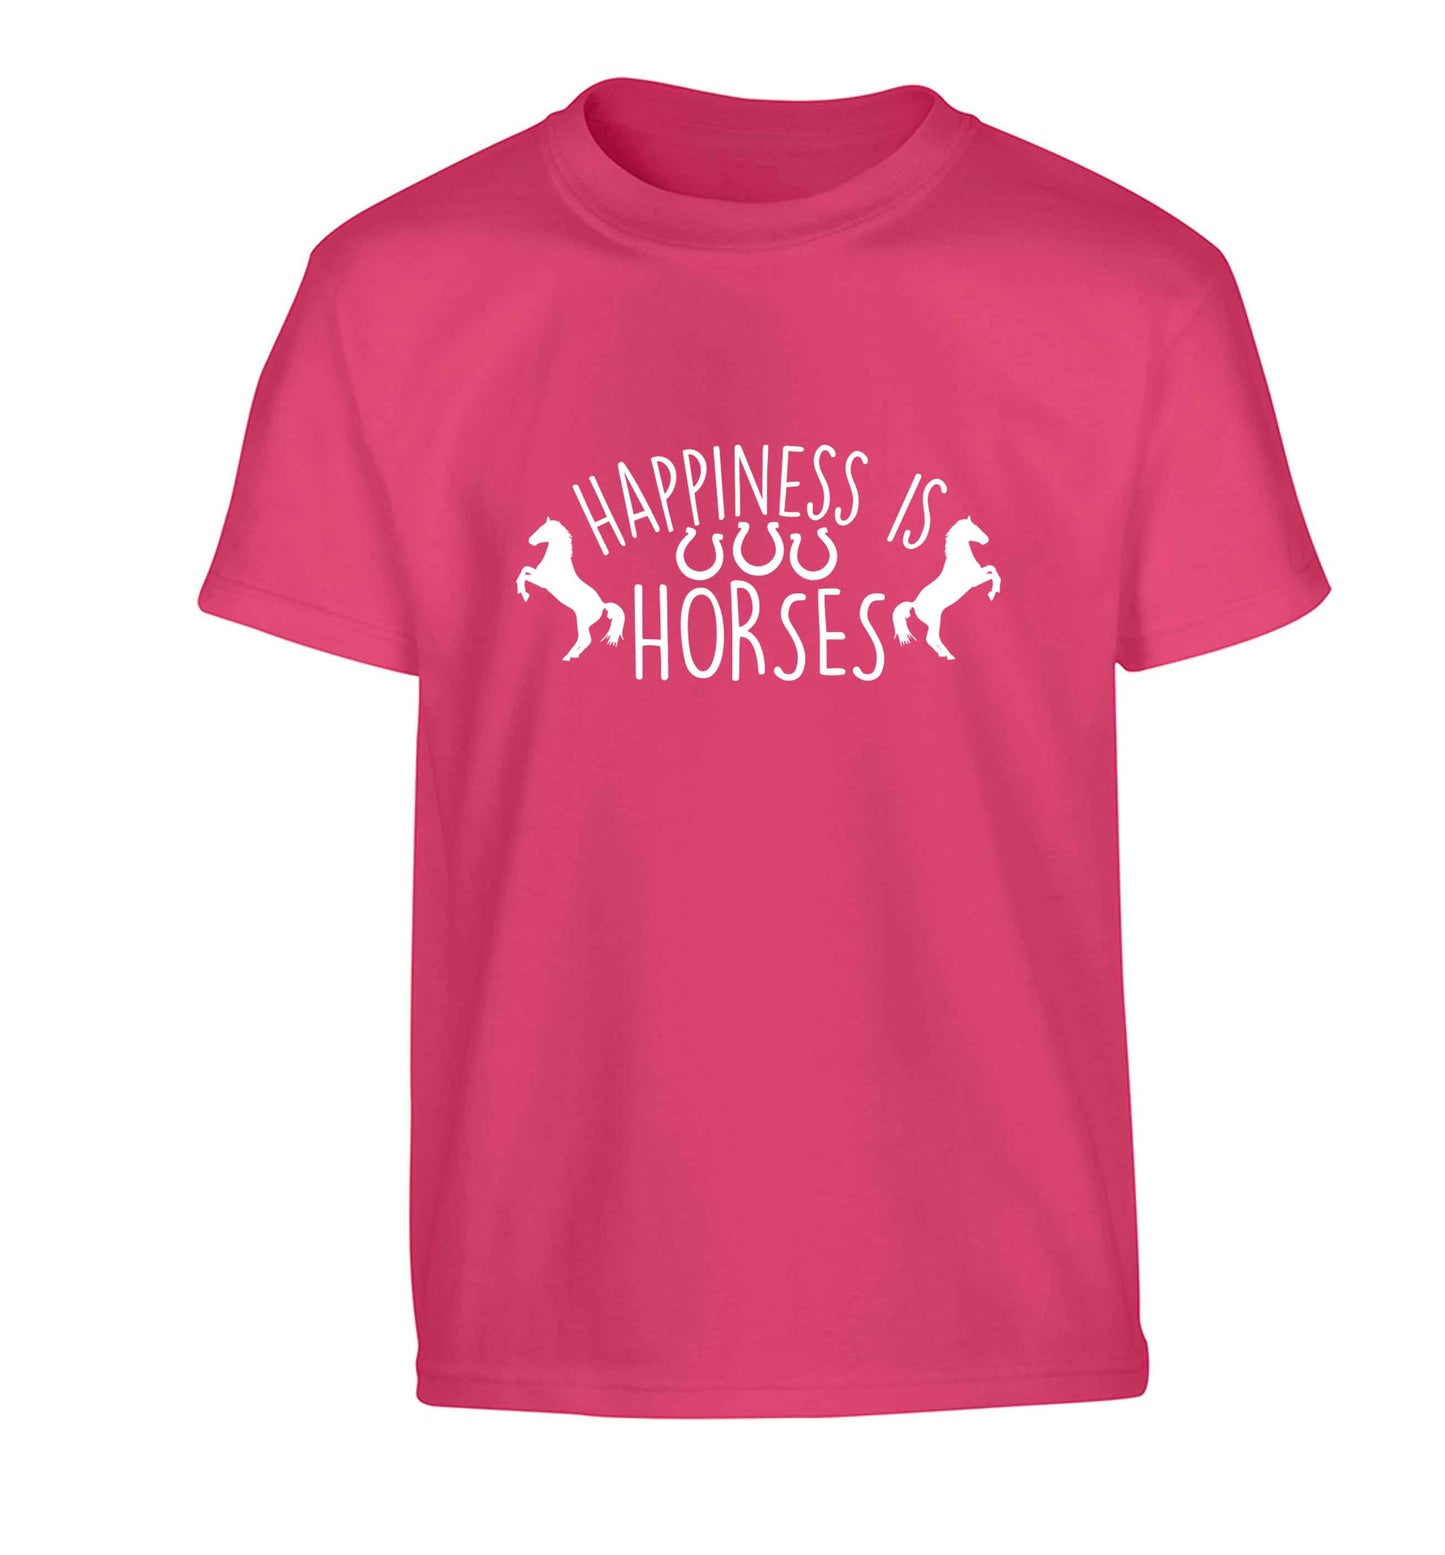 Happiness is horses Children's pink Tshirt 12-13 Years